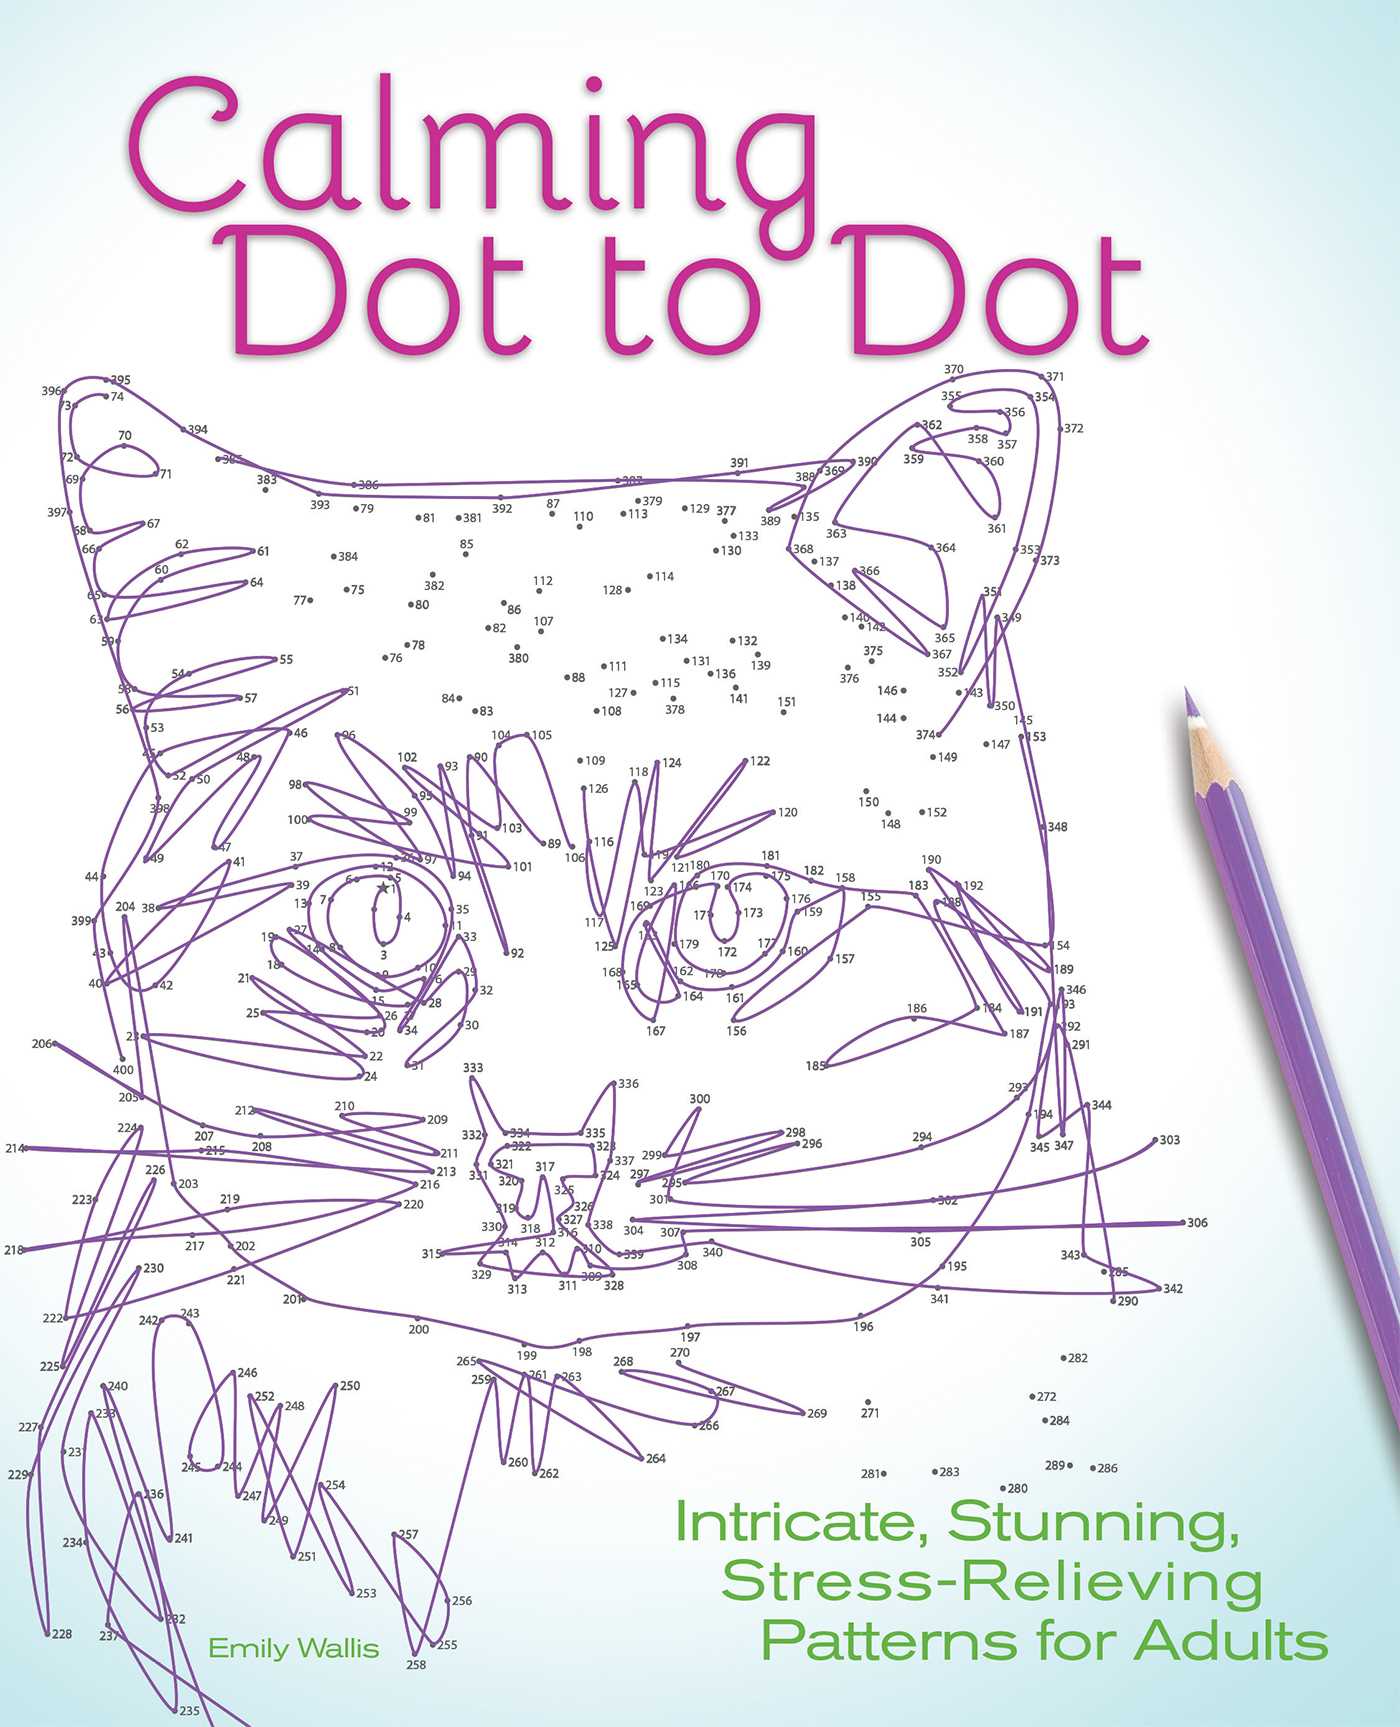 Calming Dot to Dot : Intricate, Stunning, Stress-Relieving Patterns for Adults